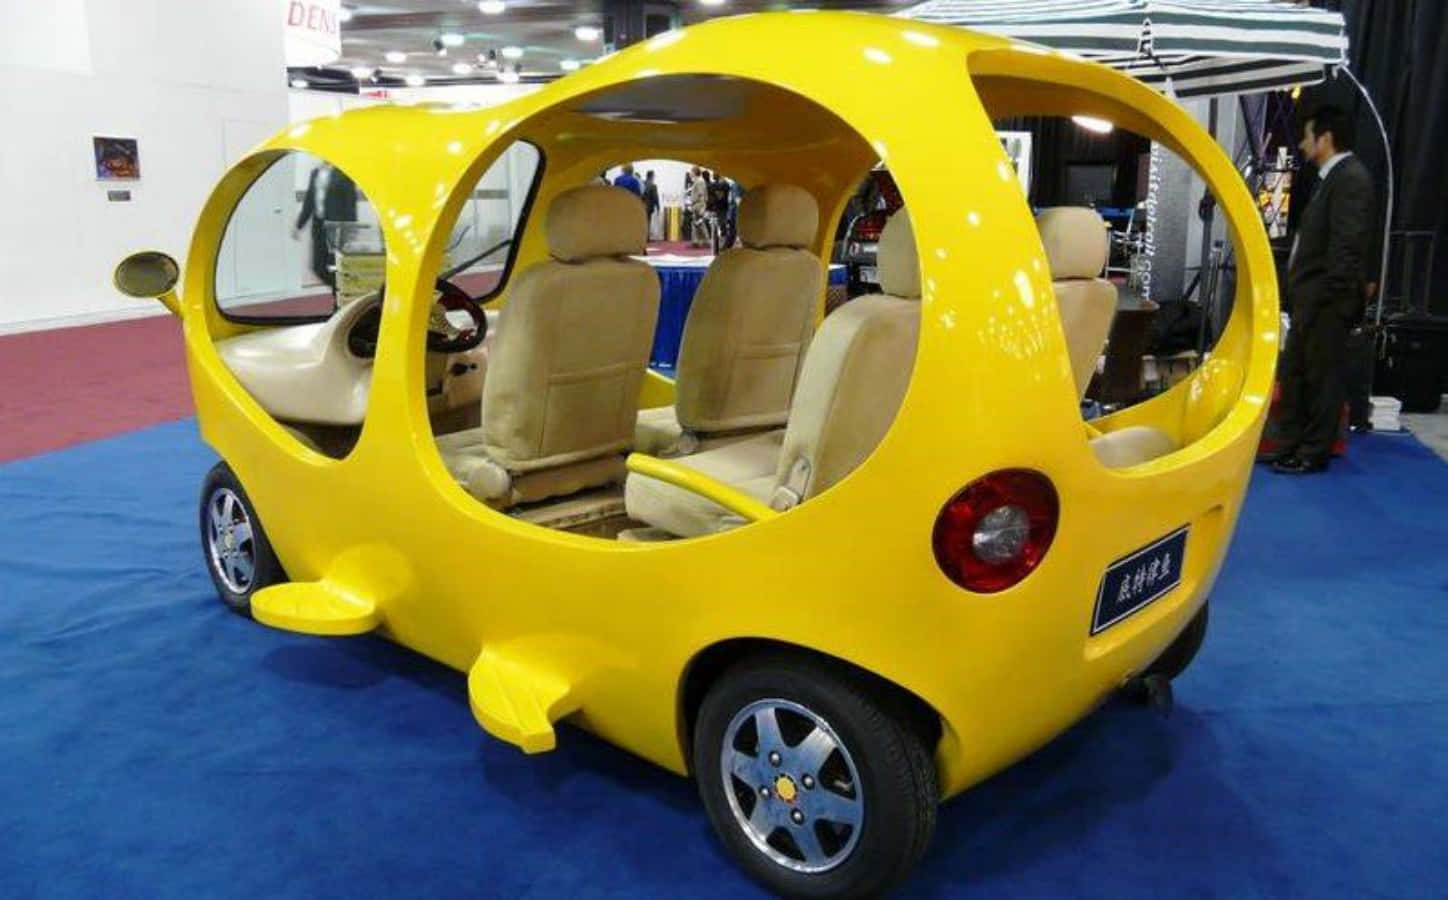 A Yellow Car With Two Seats On Display At A Show